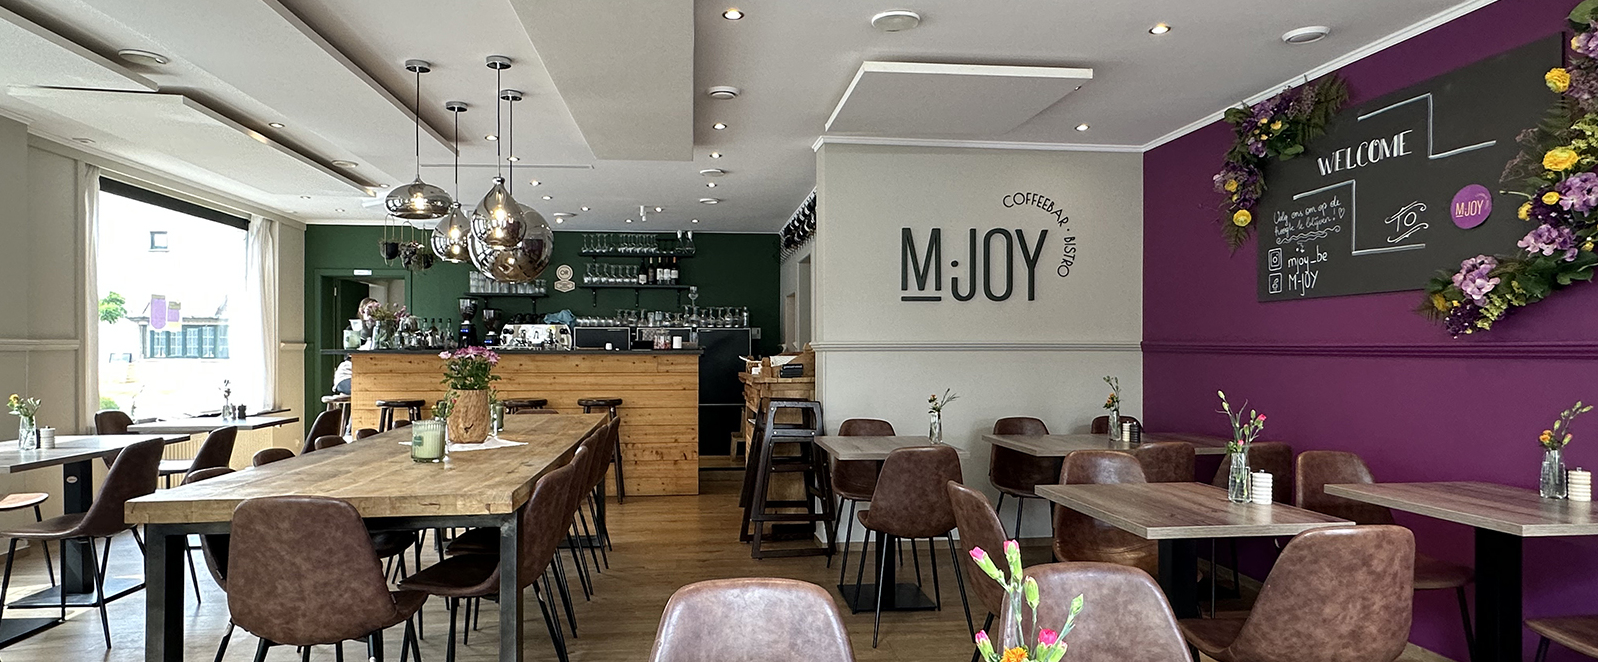 Interior of M.JOY Coffeebar & Bistro with tables and chairs